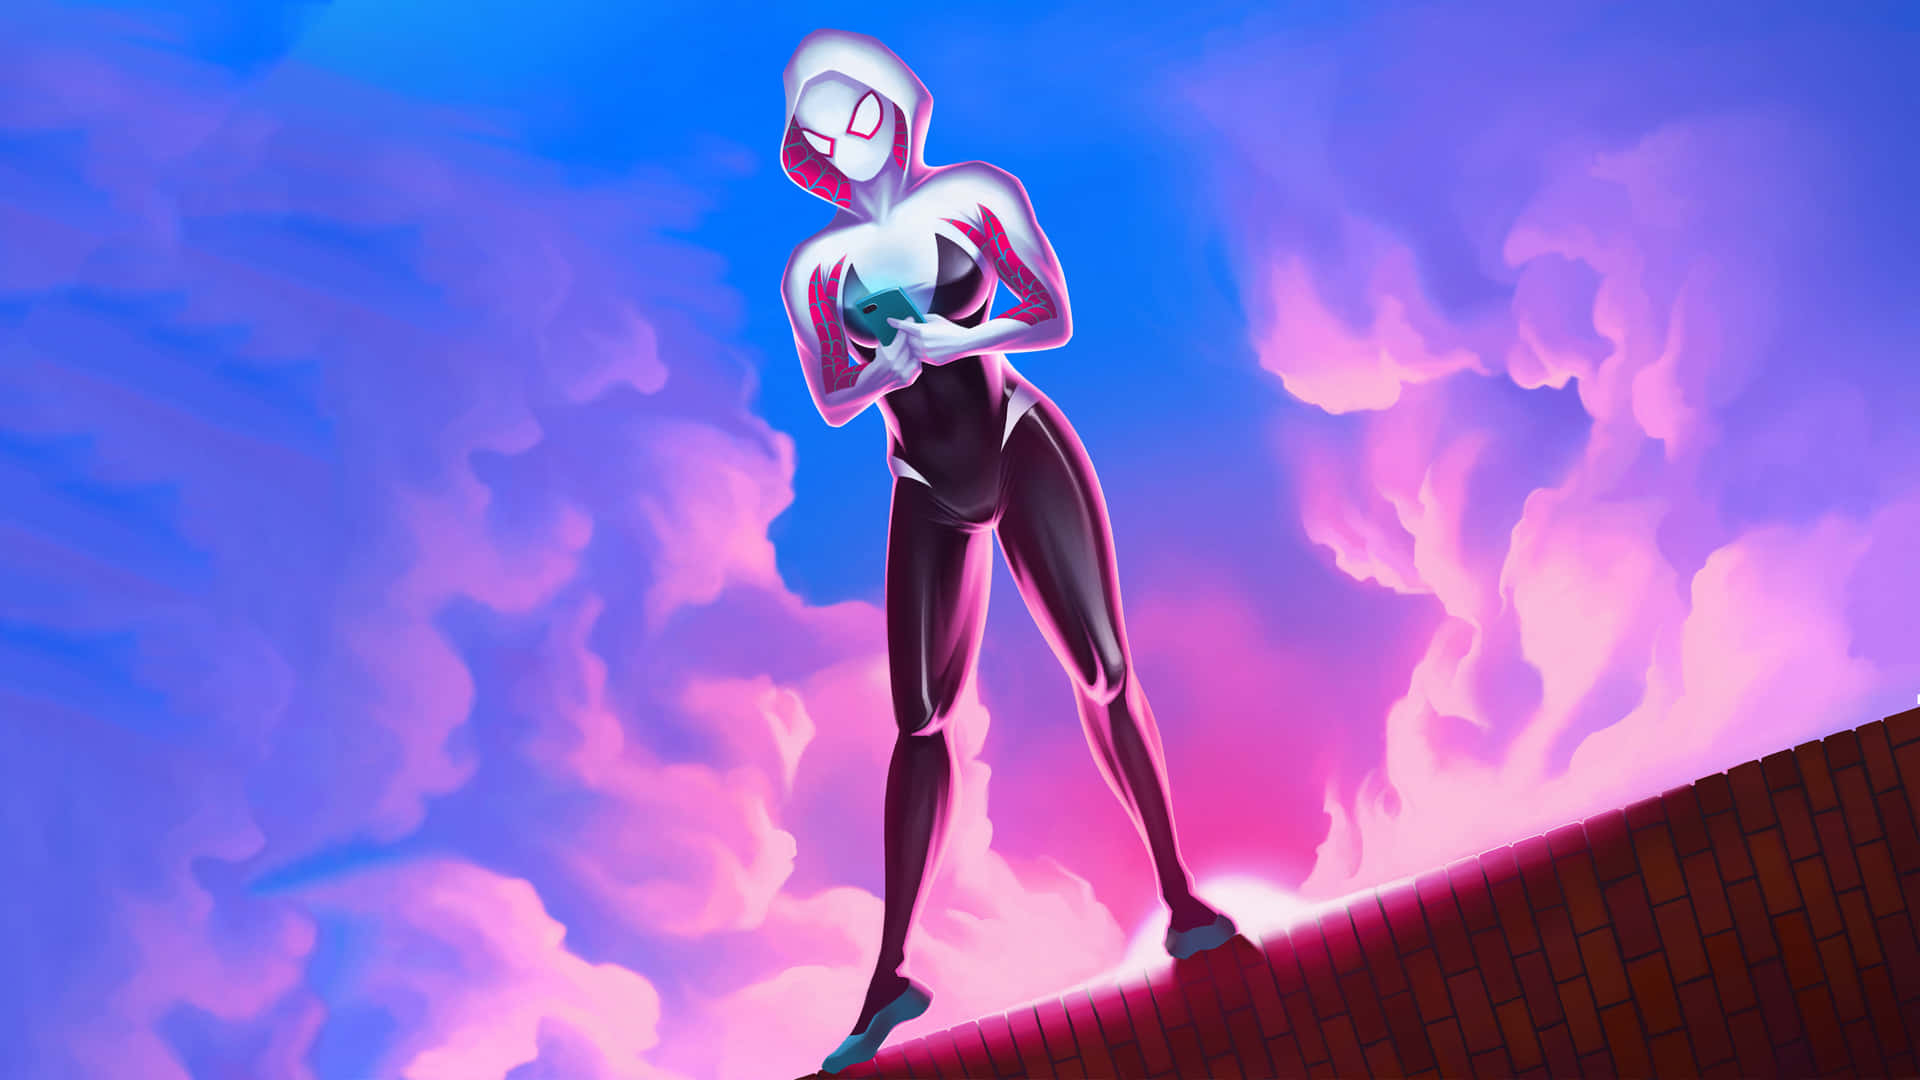 Spider Gwen rises in a vibrant web of color